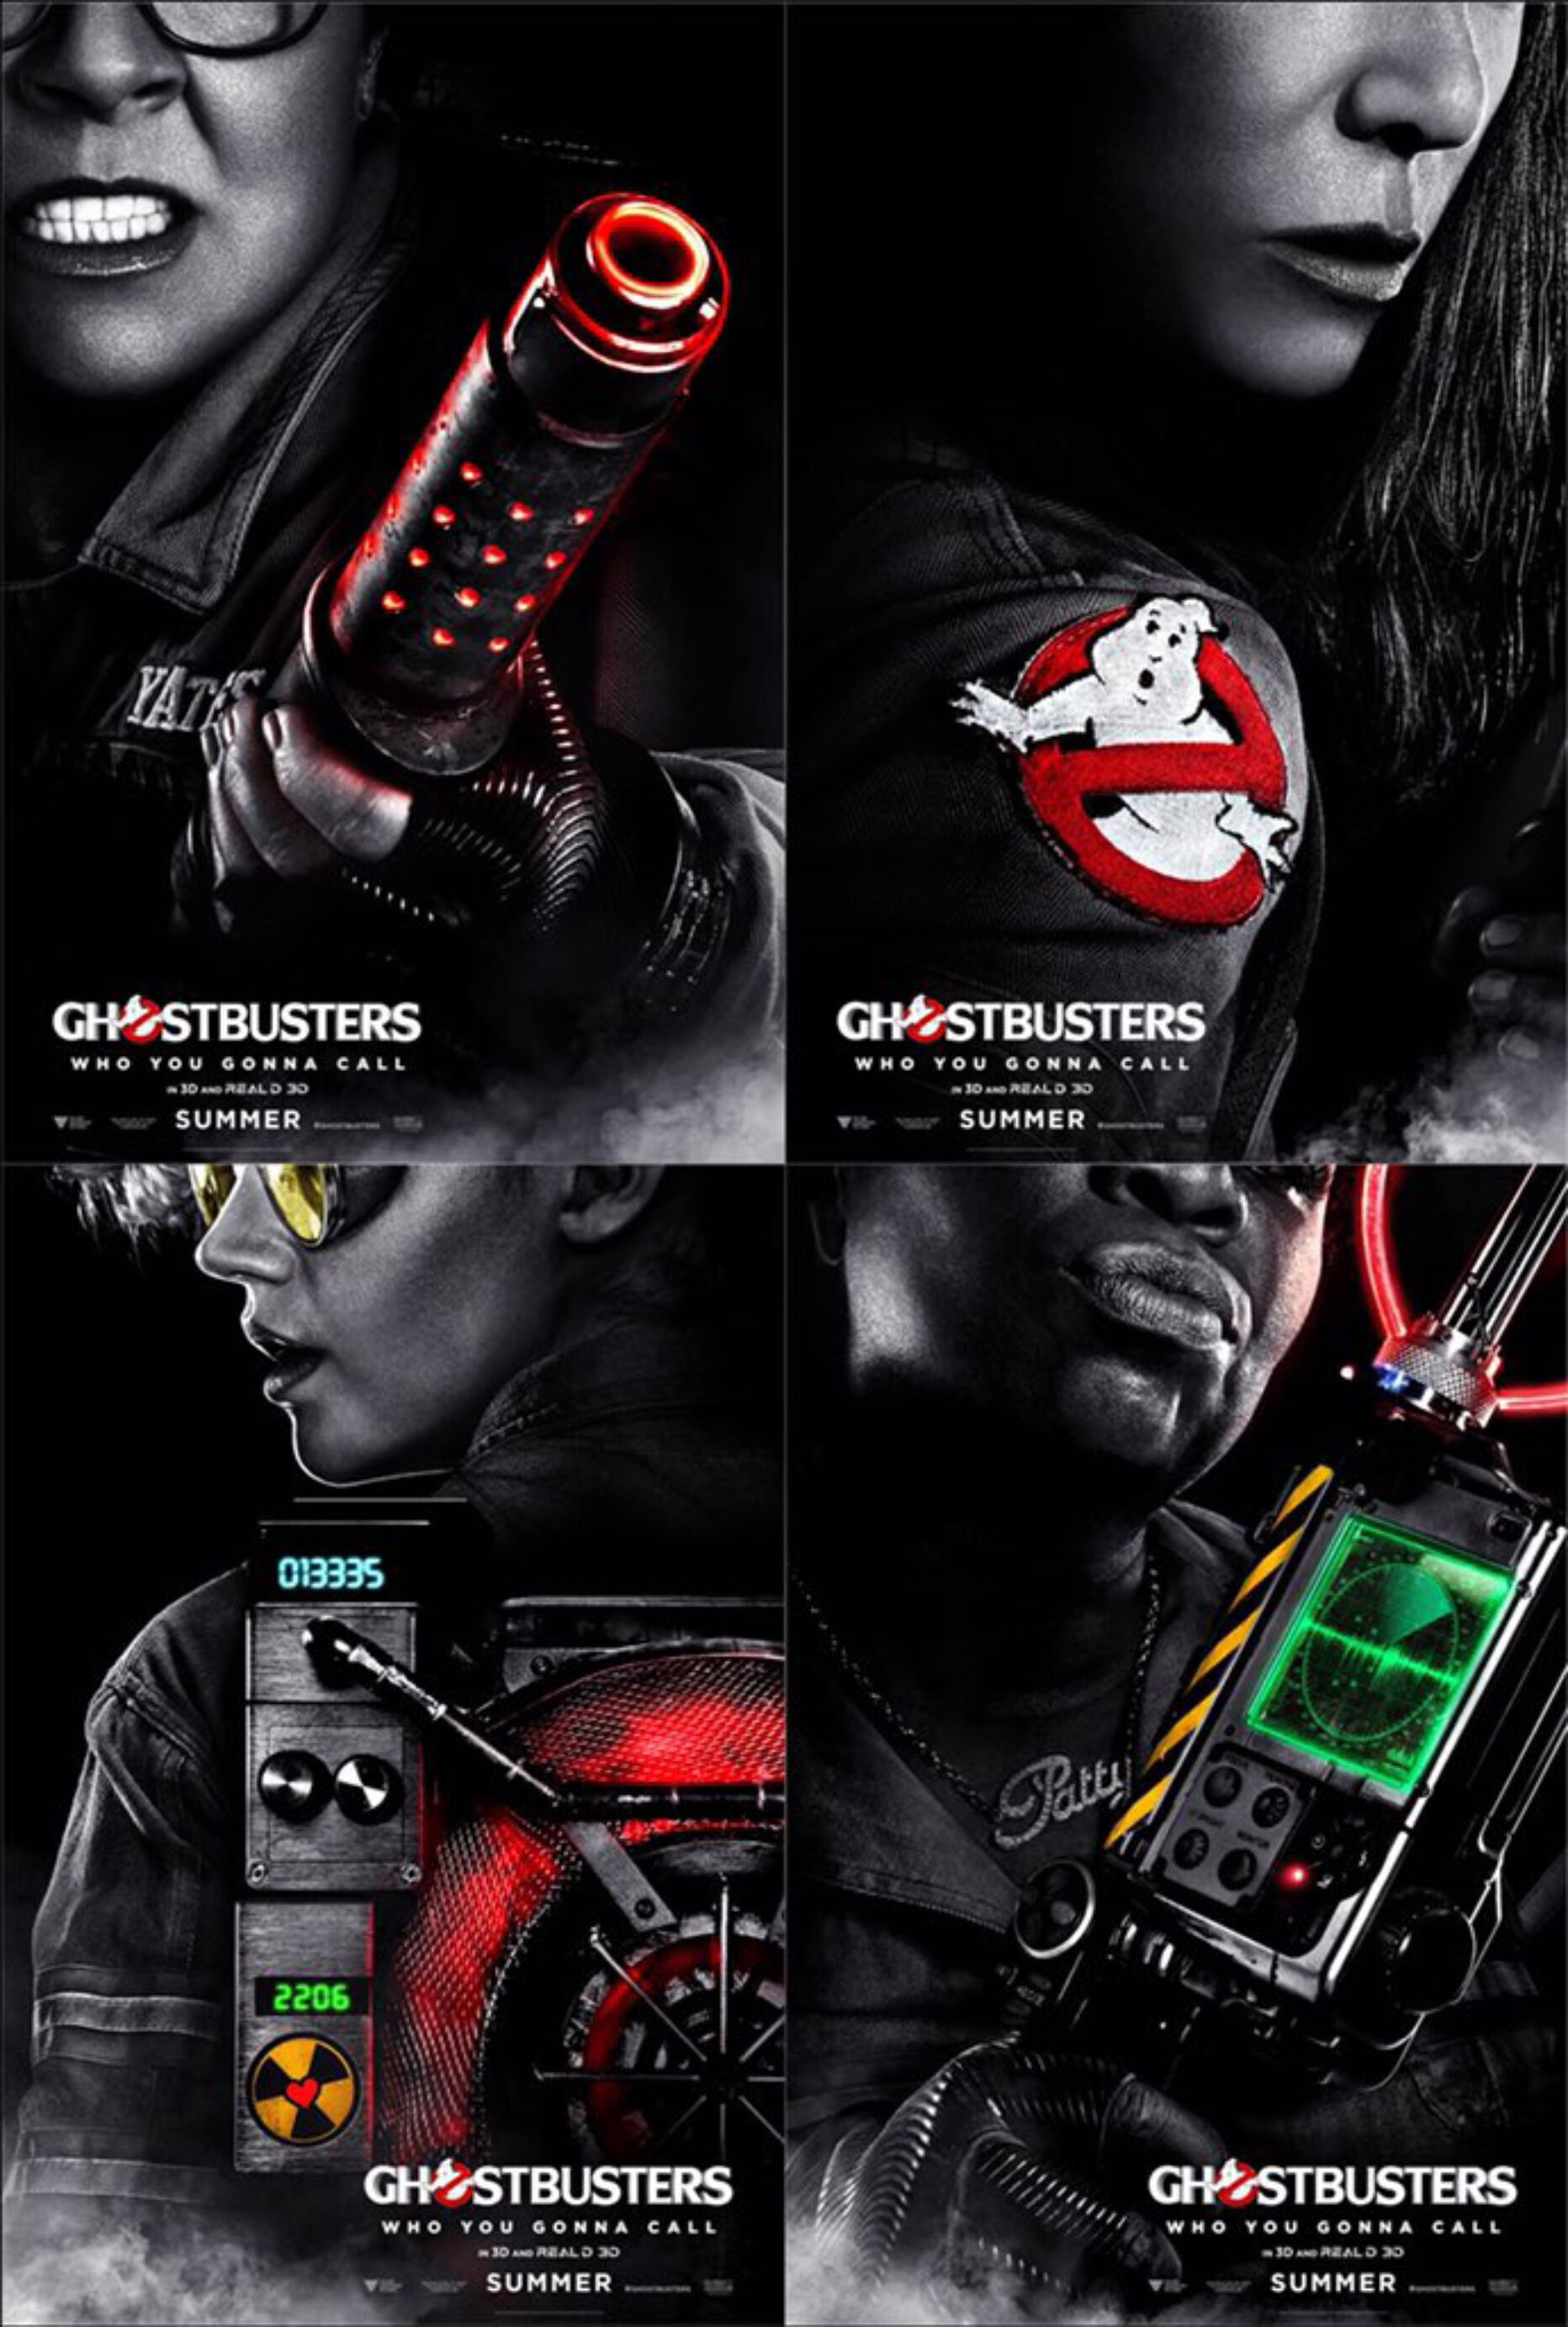 Tuesday Trailer #39: Ghostbusters